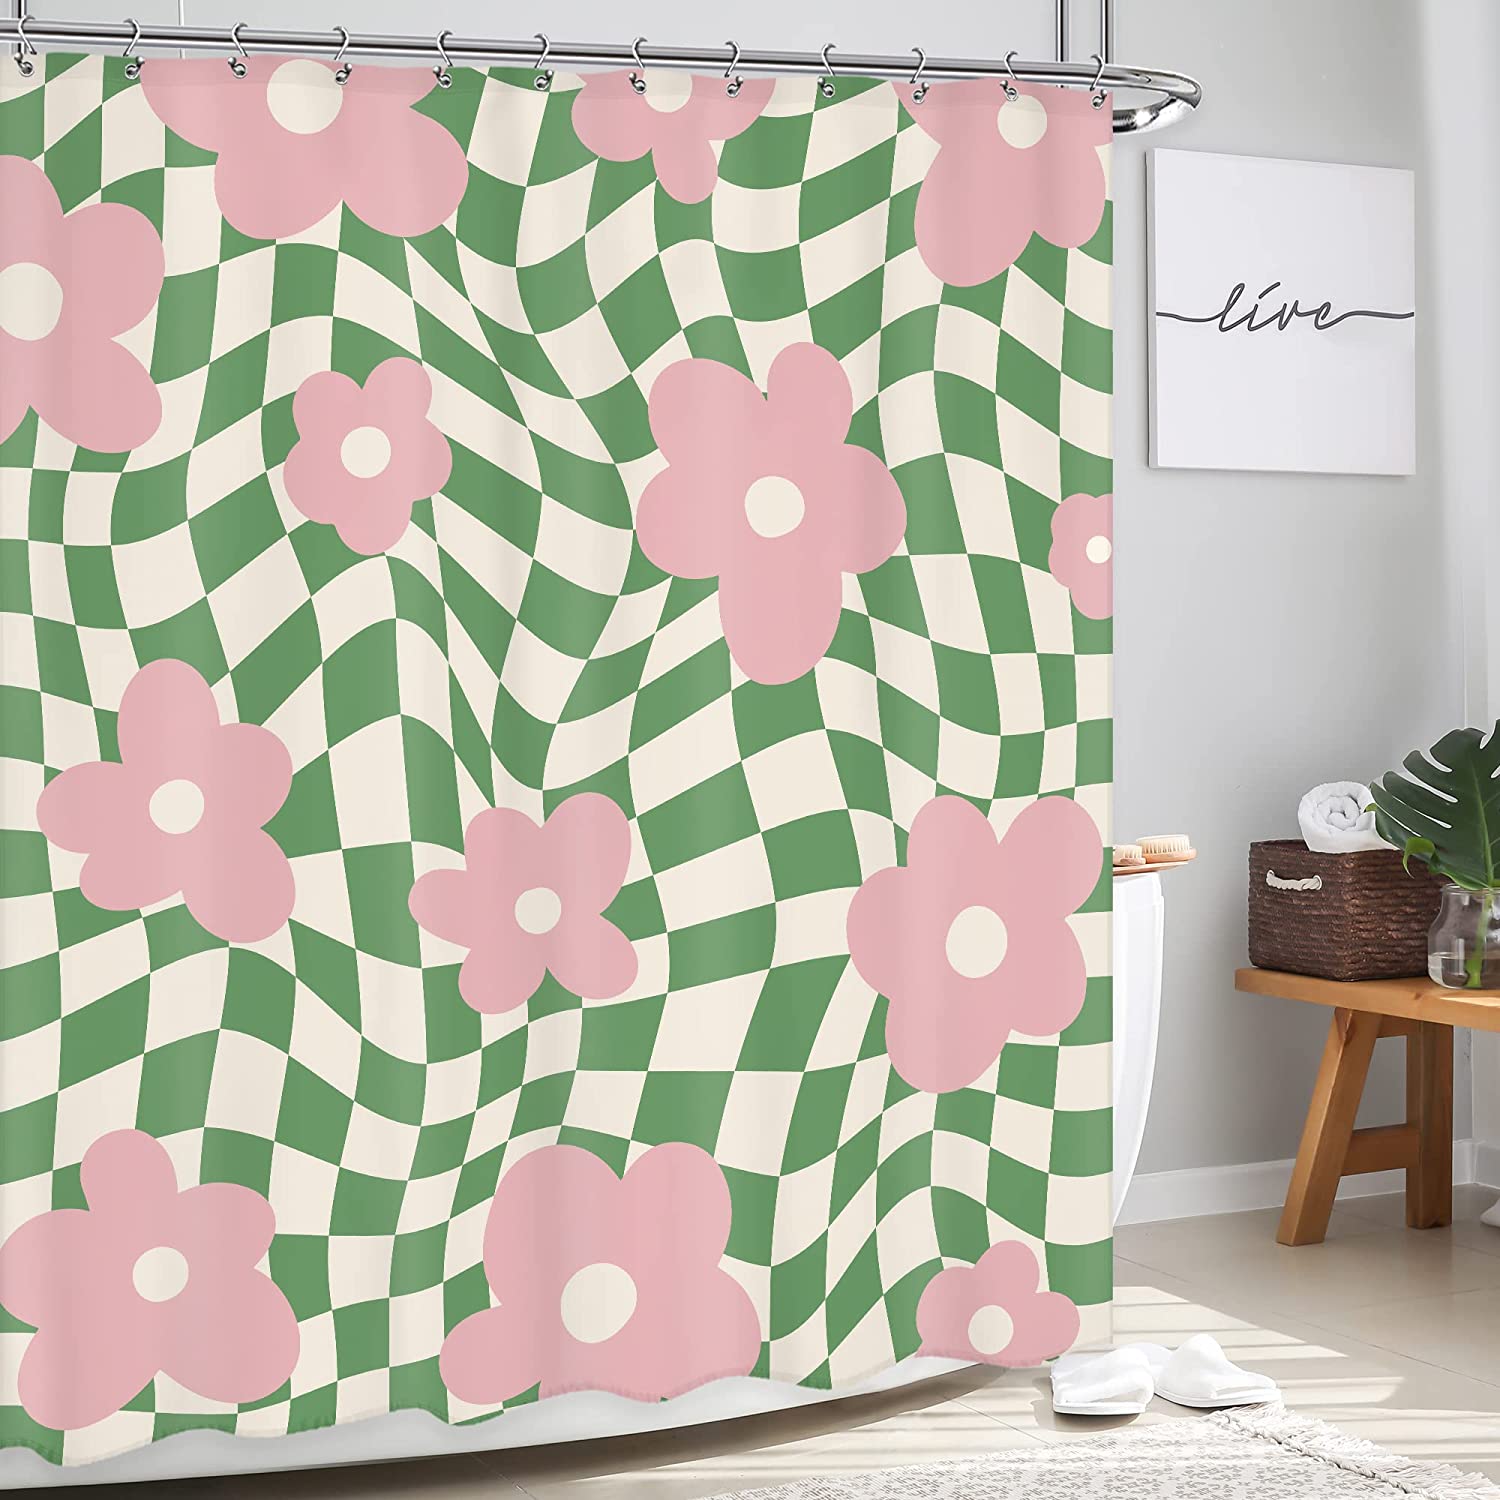 Newsely Retro Pink Green Trippy Shower Curtain 60Wx72H Inch Cute Flower Abstract Checkered Plaid Shower Curtain Bathroom Set Psychedelic Aesthetic Waterproof Bath Decoration Accessories Home Decor